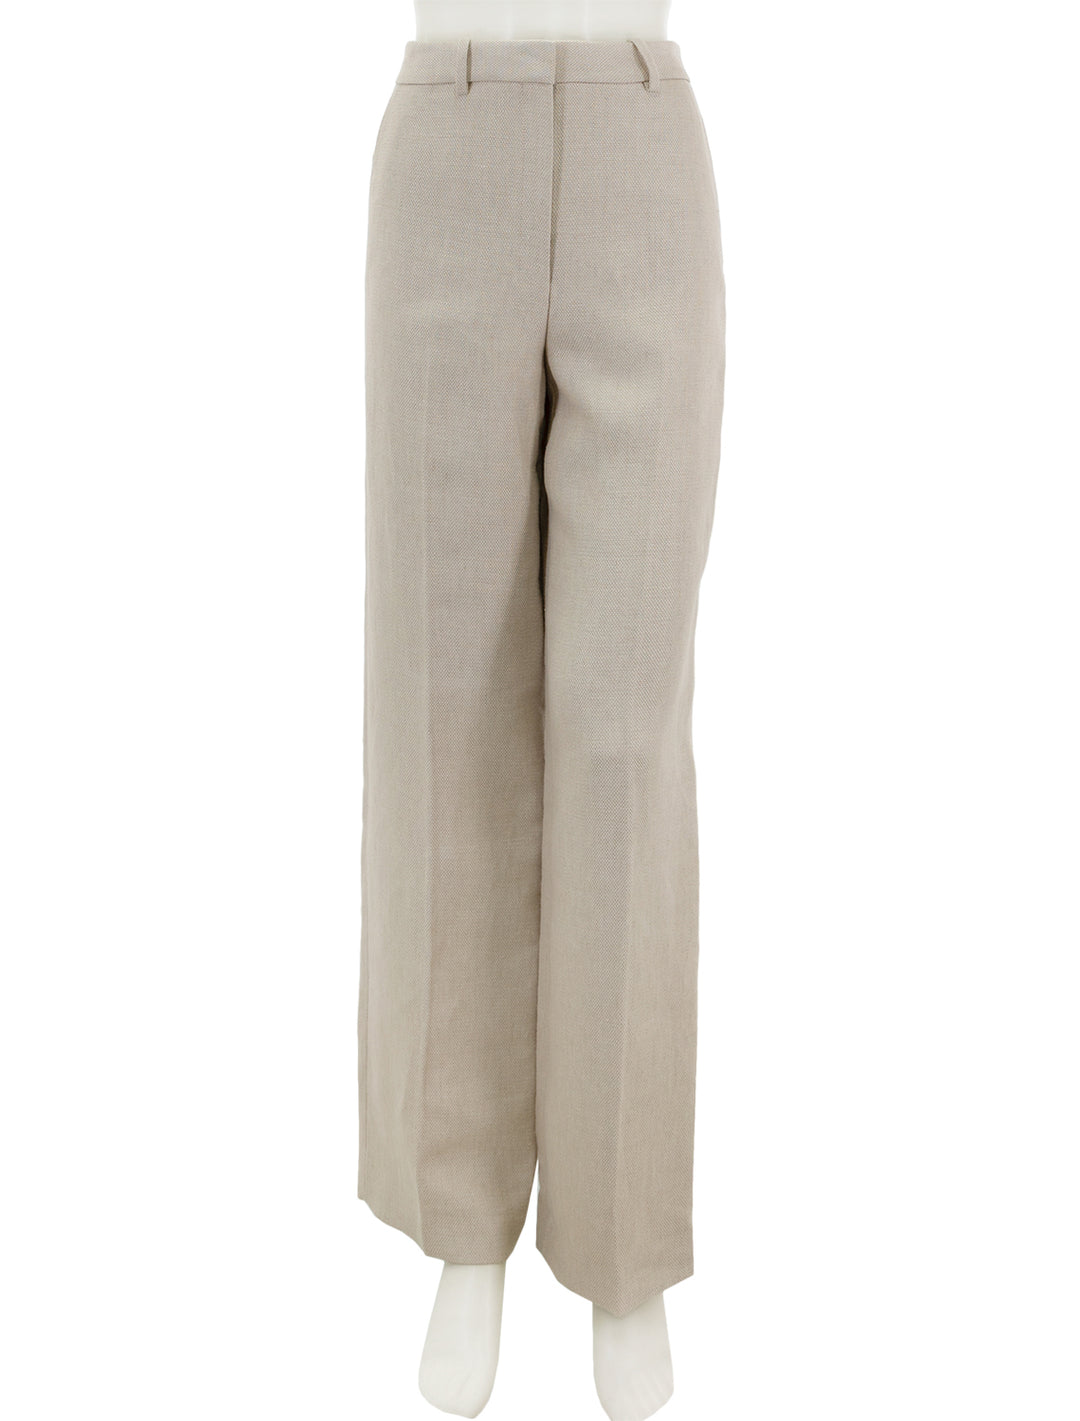 Front view of Theory's clean trouser in straw basketweave linen.